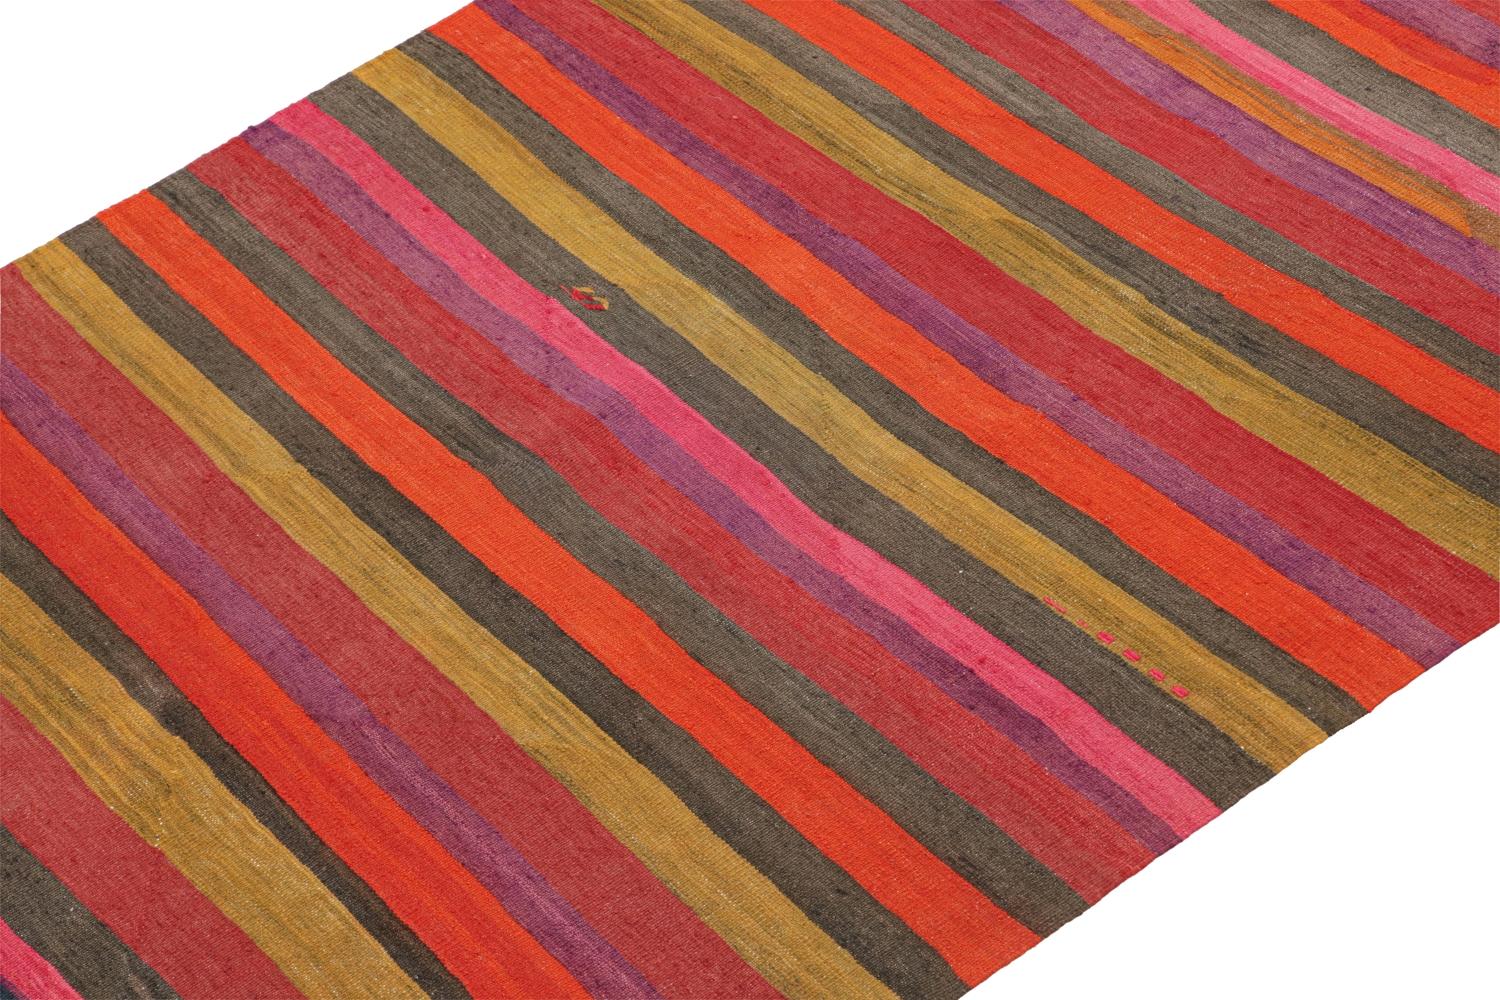 This vintage 5x9 Persian Kilim is a mid-century tribal rug that we believe originates from the Shahsavan tribe. 

On the Design:

Handwoven in wool circa 1950-1960, its design enjoys a polychromatic colorway with stripes in an all-over pattern.